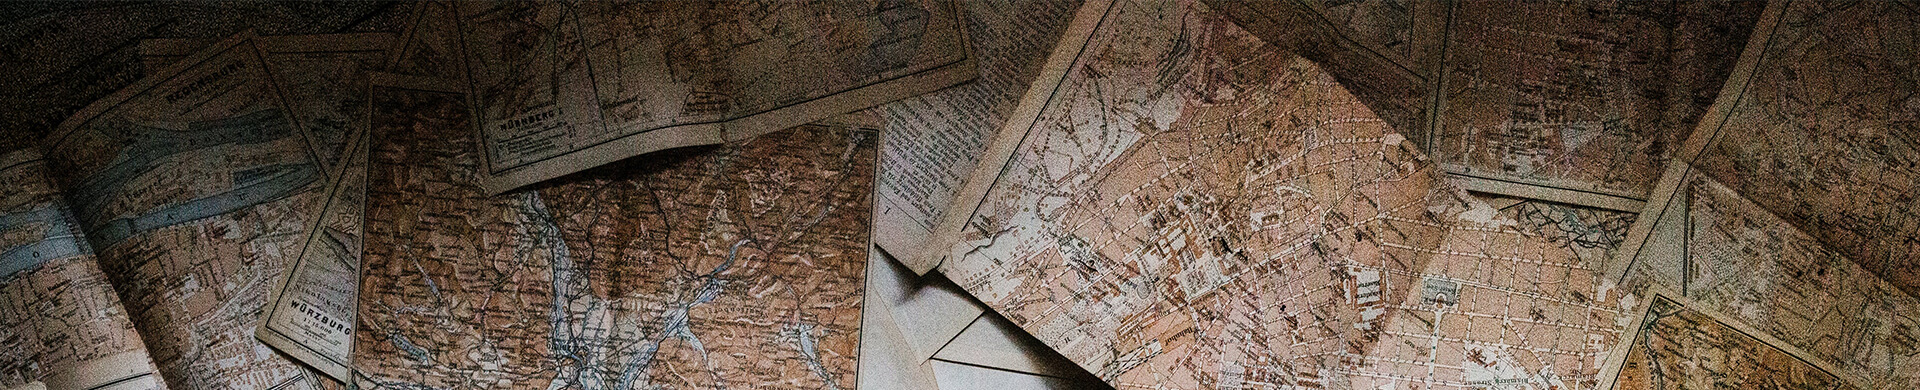 Retro maps on a table